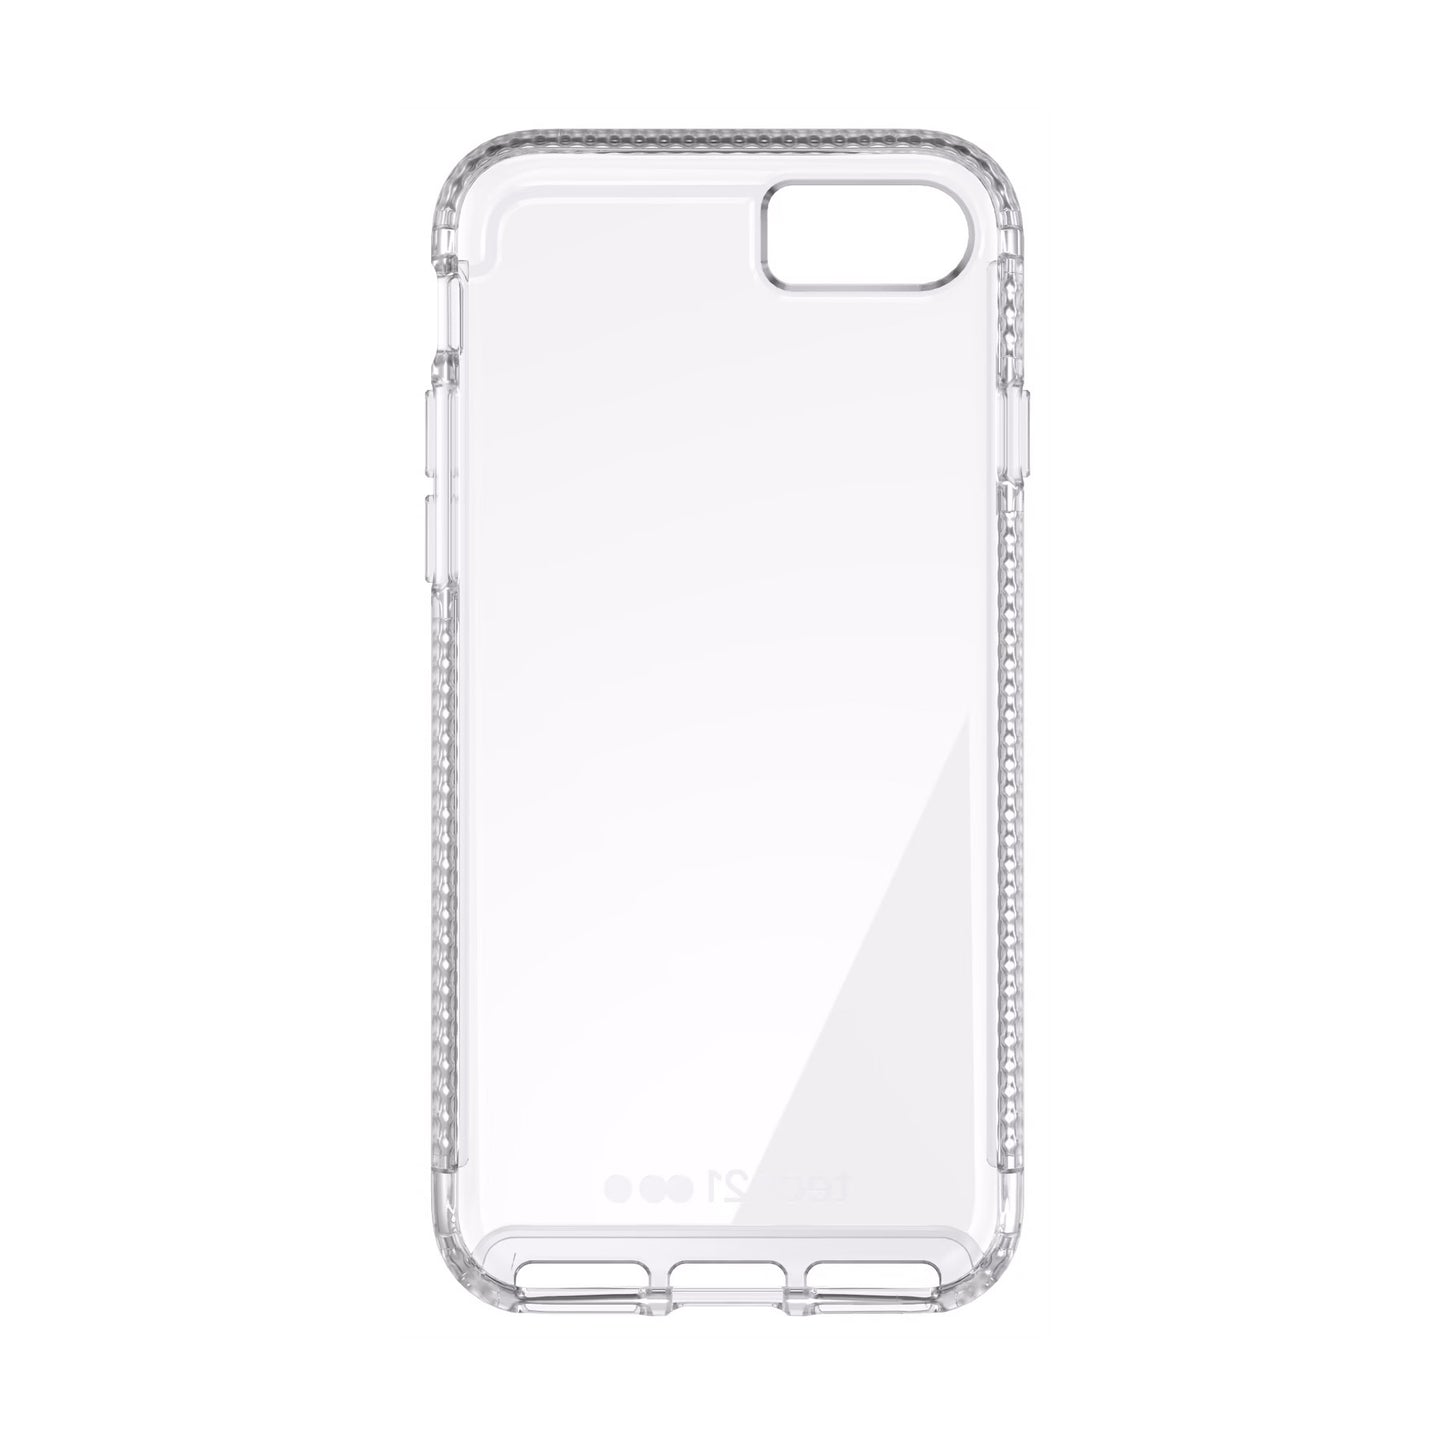 Tech21 Pure Clear voor iPhone SE 3 / SE 2 / 8 / 7 / 6s / 6 - Transparant